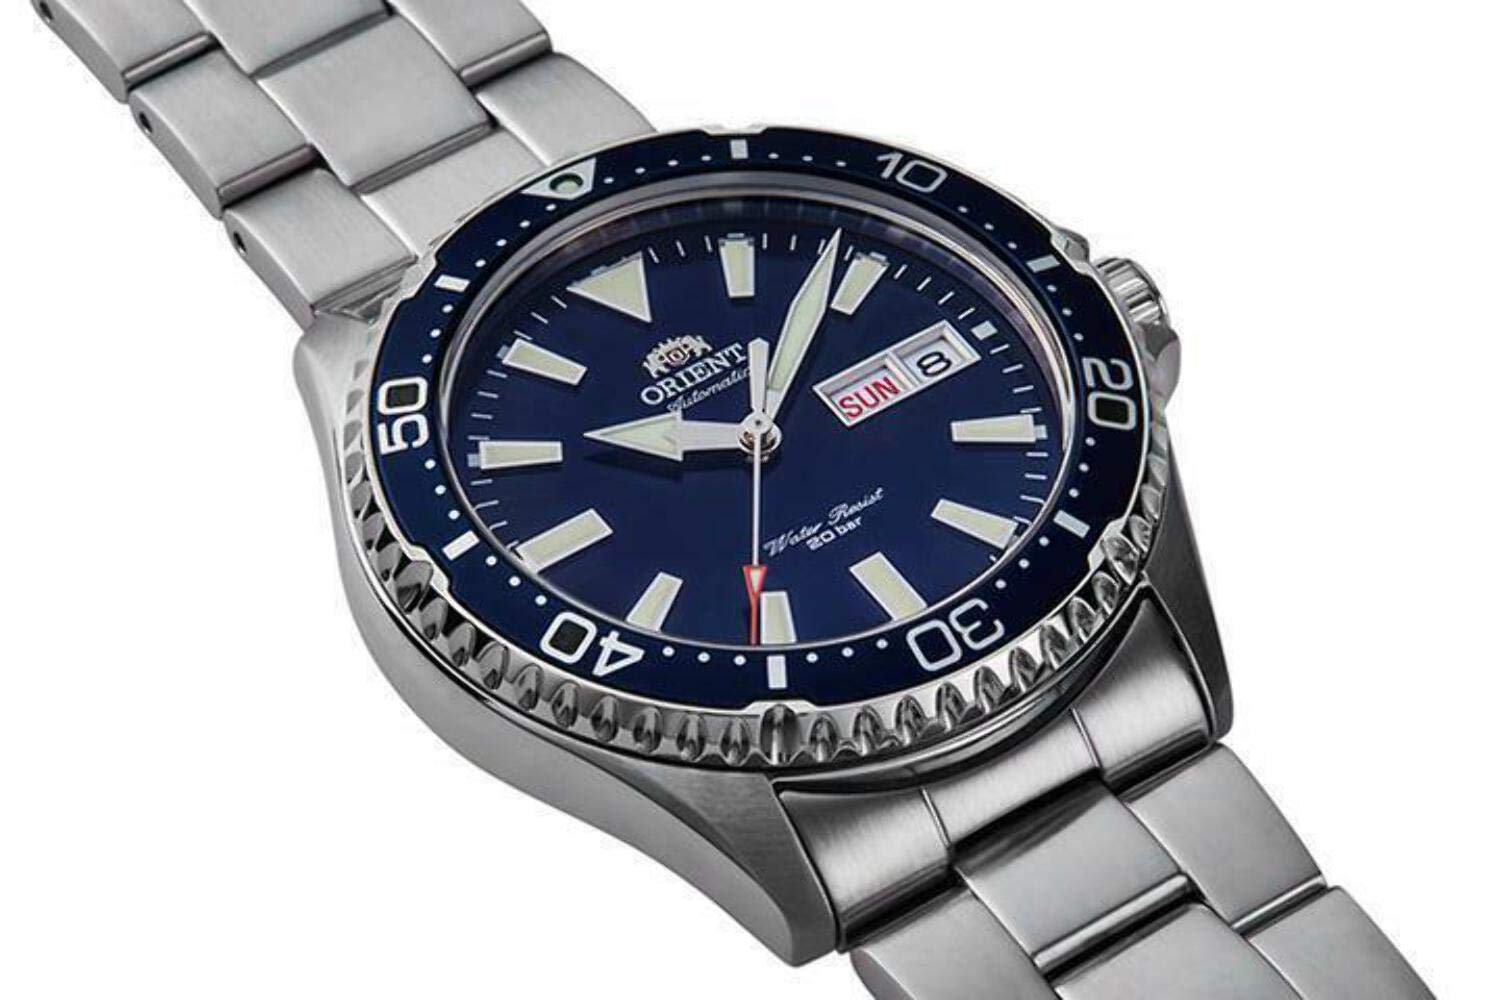 Orient Mens Analogue Automatic Watch with Stainless Steel Strap RA-AA0002L19B, Blue, Bracelet